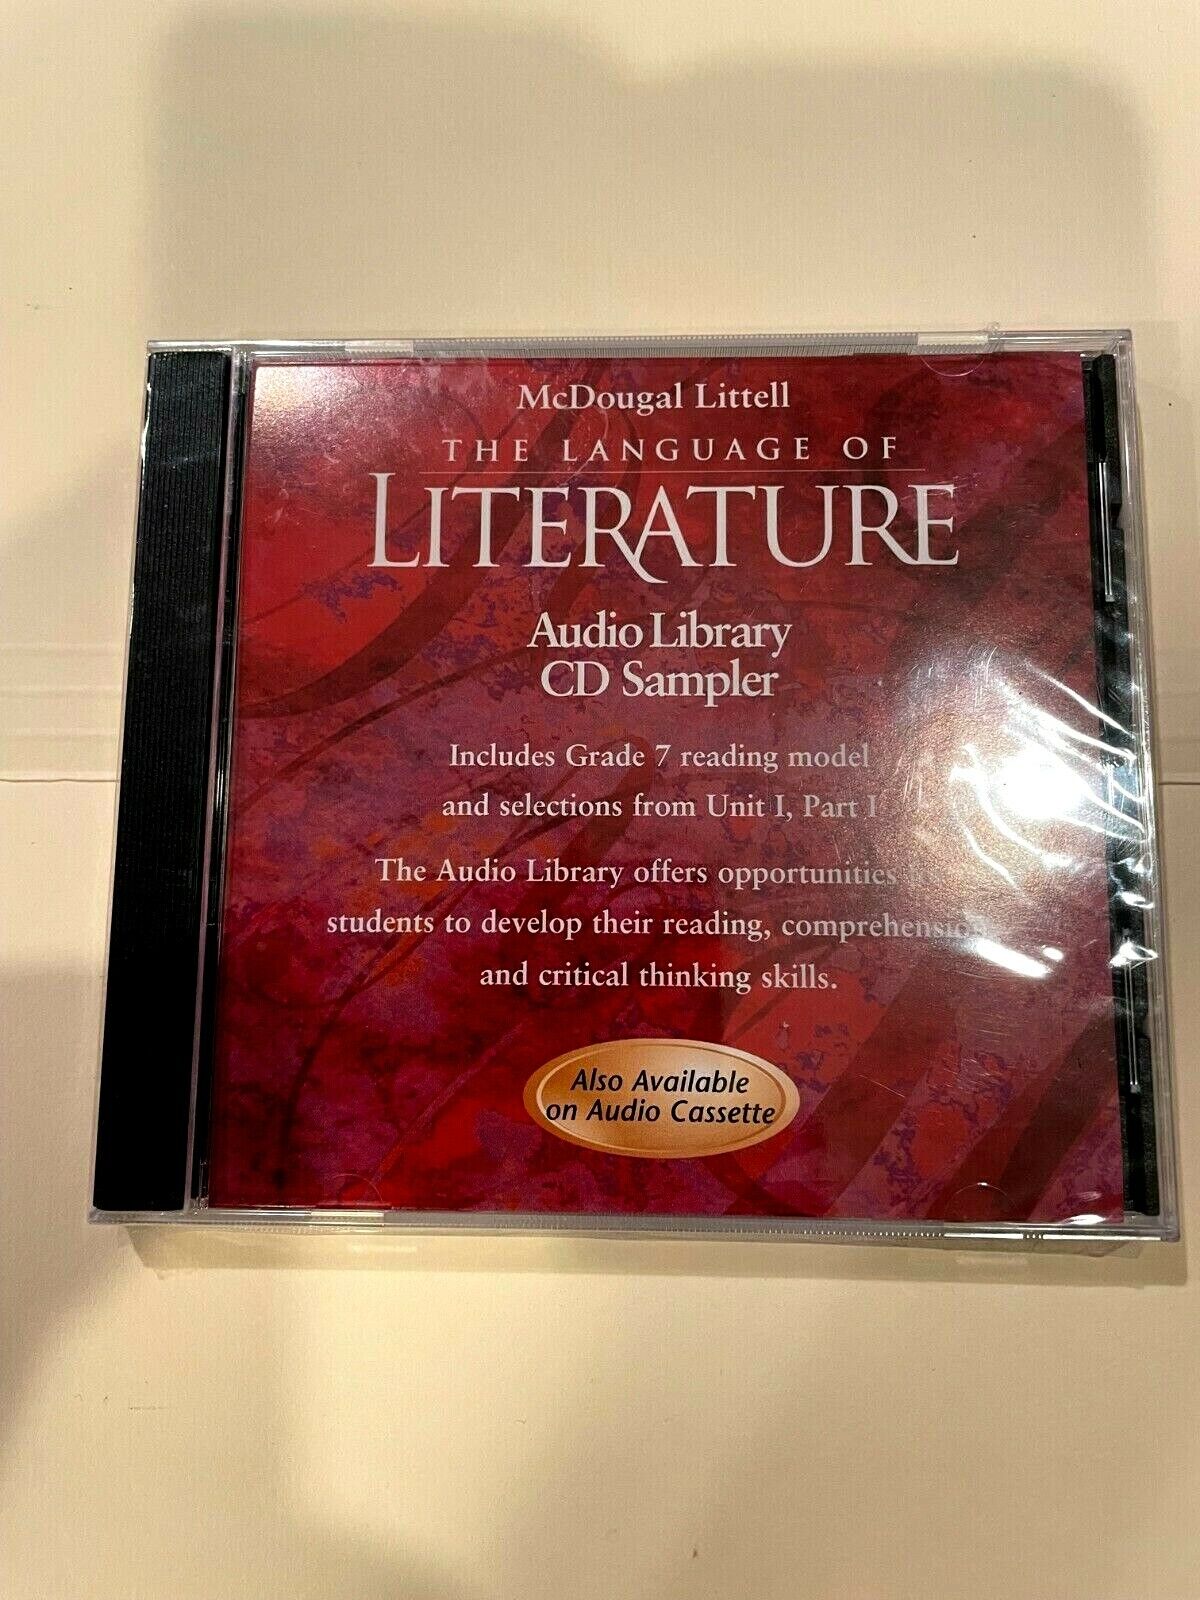 McDaugal Littell, The Language of Literature Audio Library CD Sampler, NEW